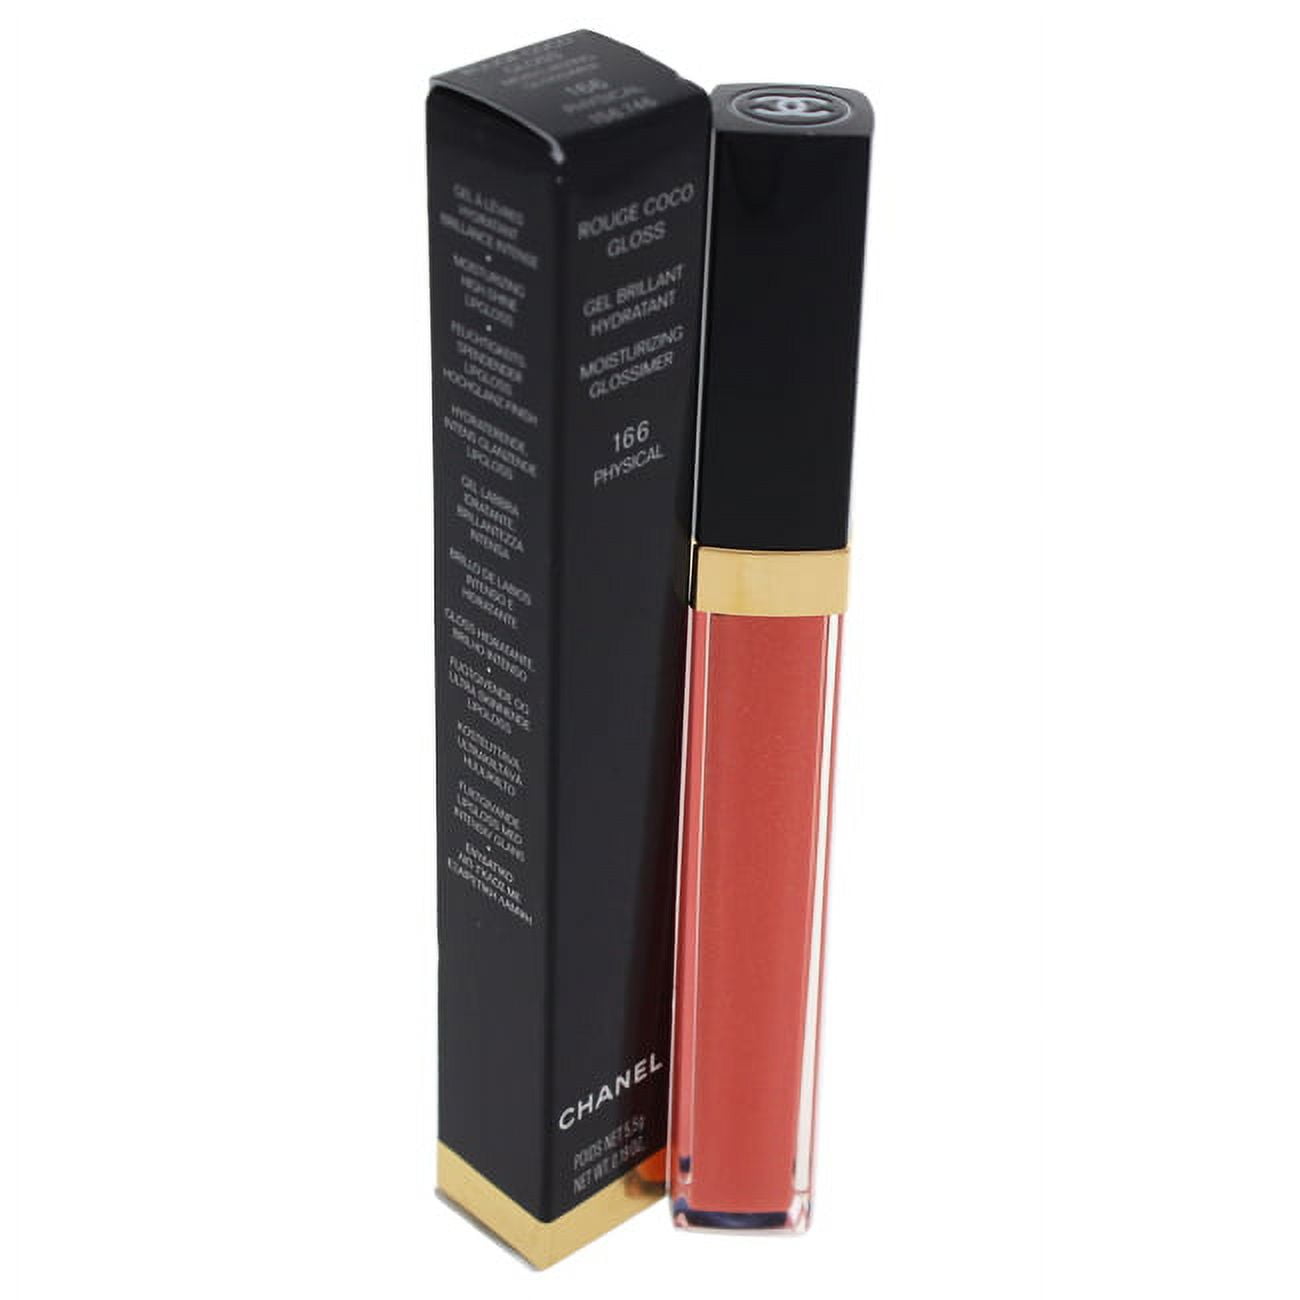 CHANEL Rouge Coco Gloss Moisturizing Glossimer - Reviews